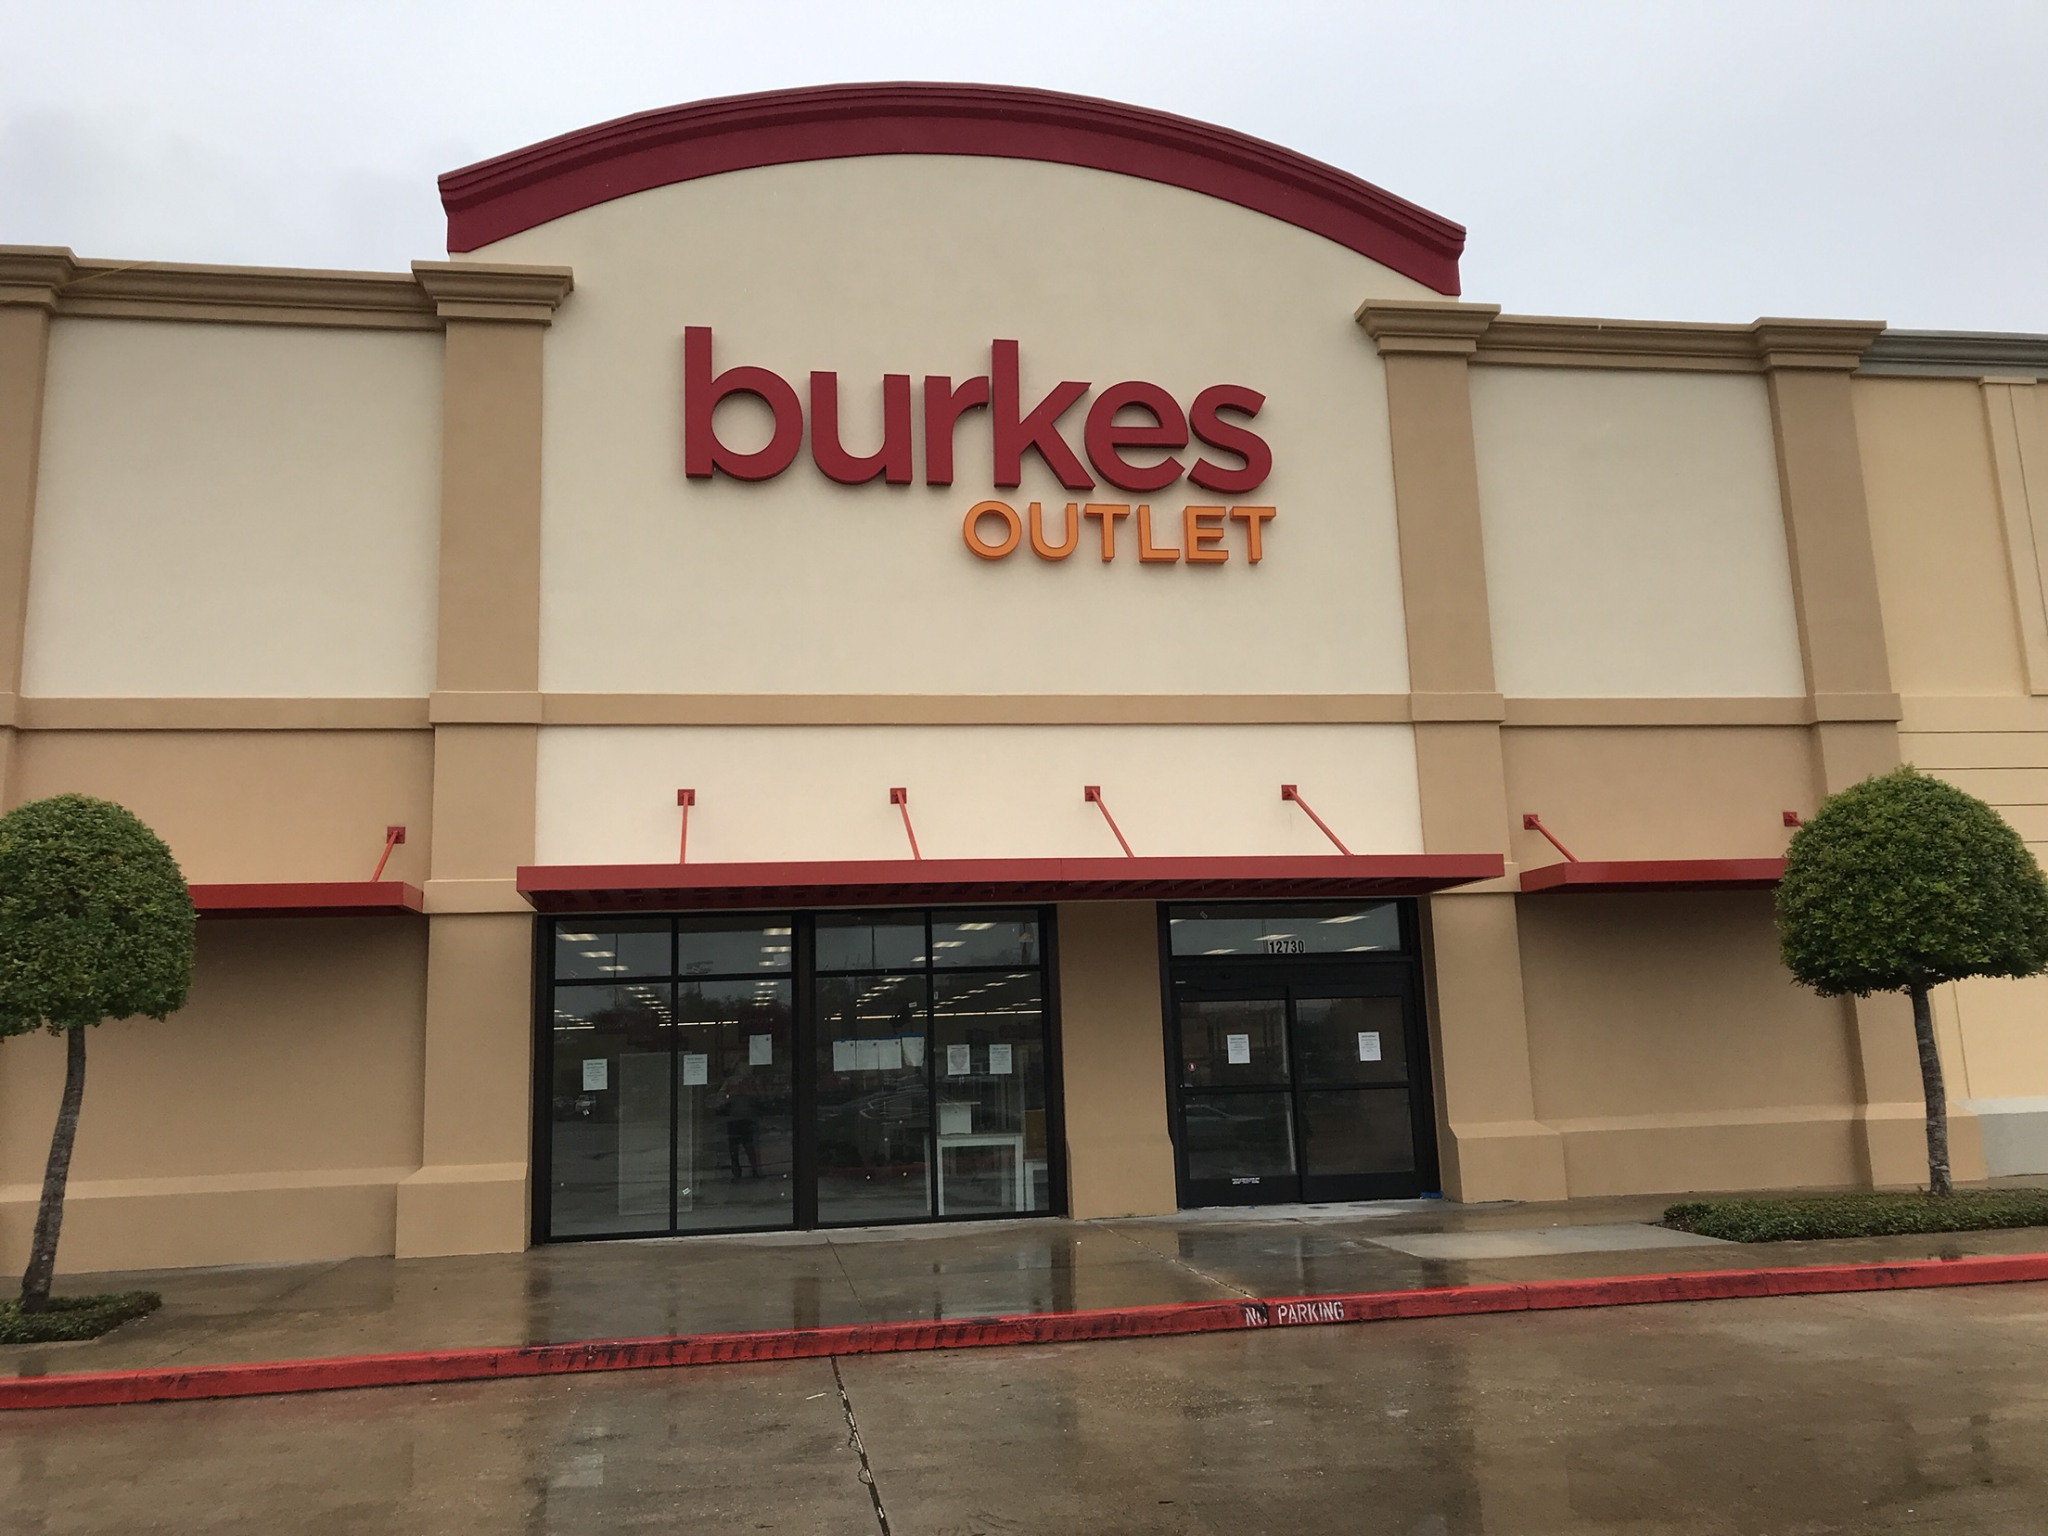 Burkes Outlet to open Stafford store - Houston Chronicle